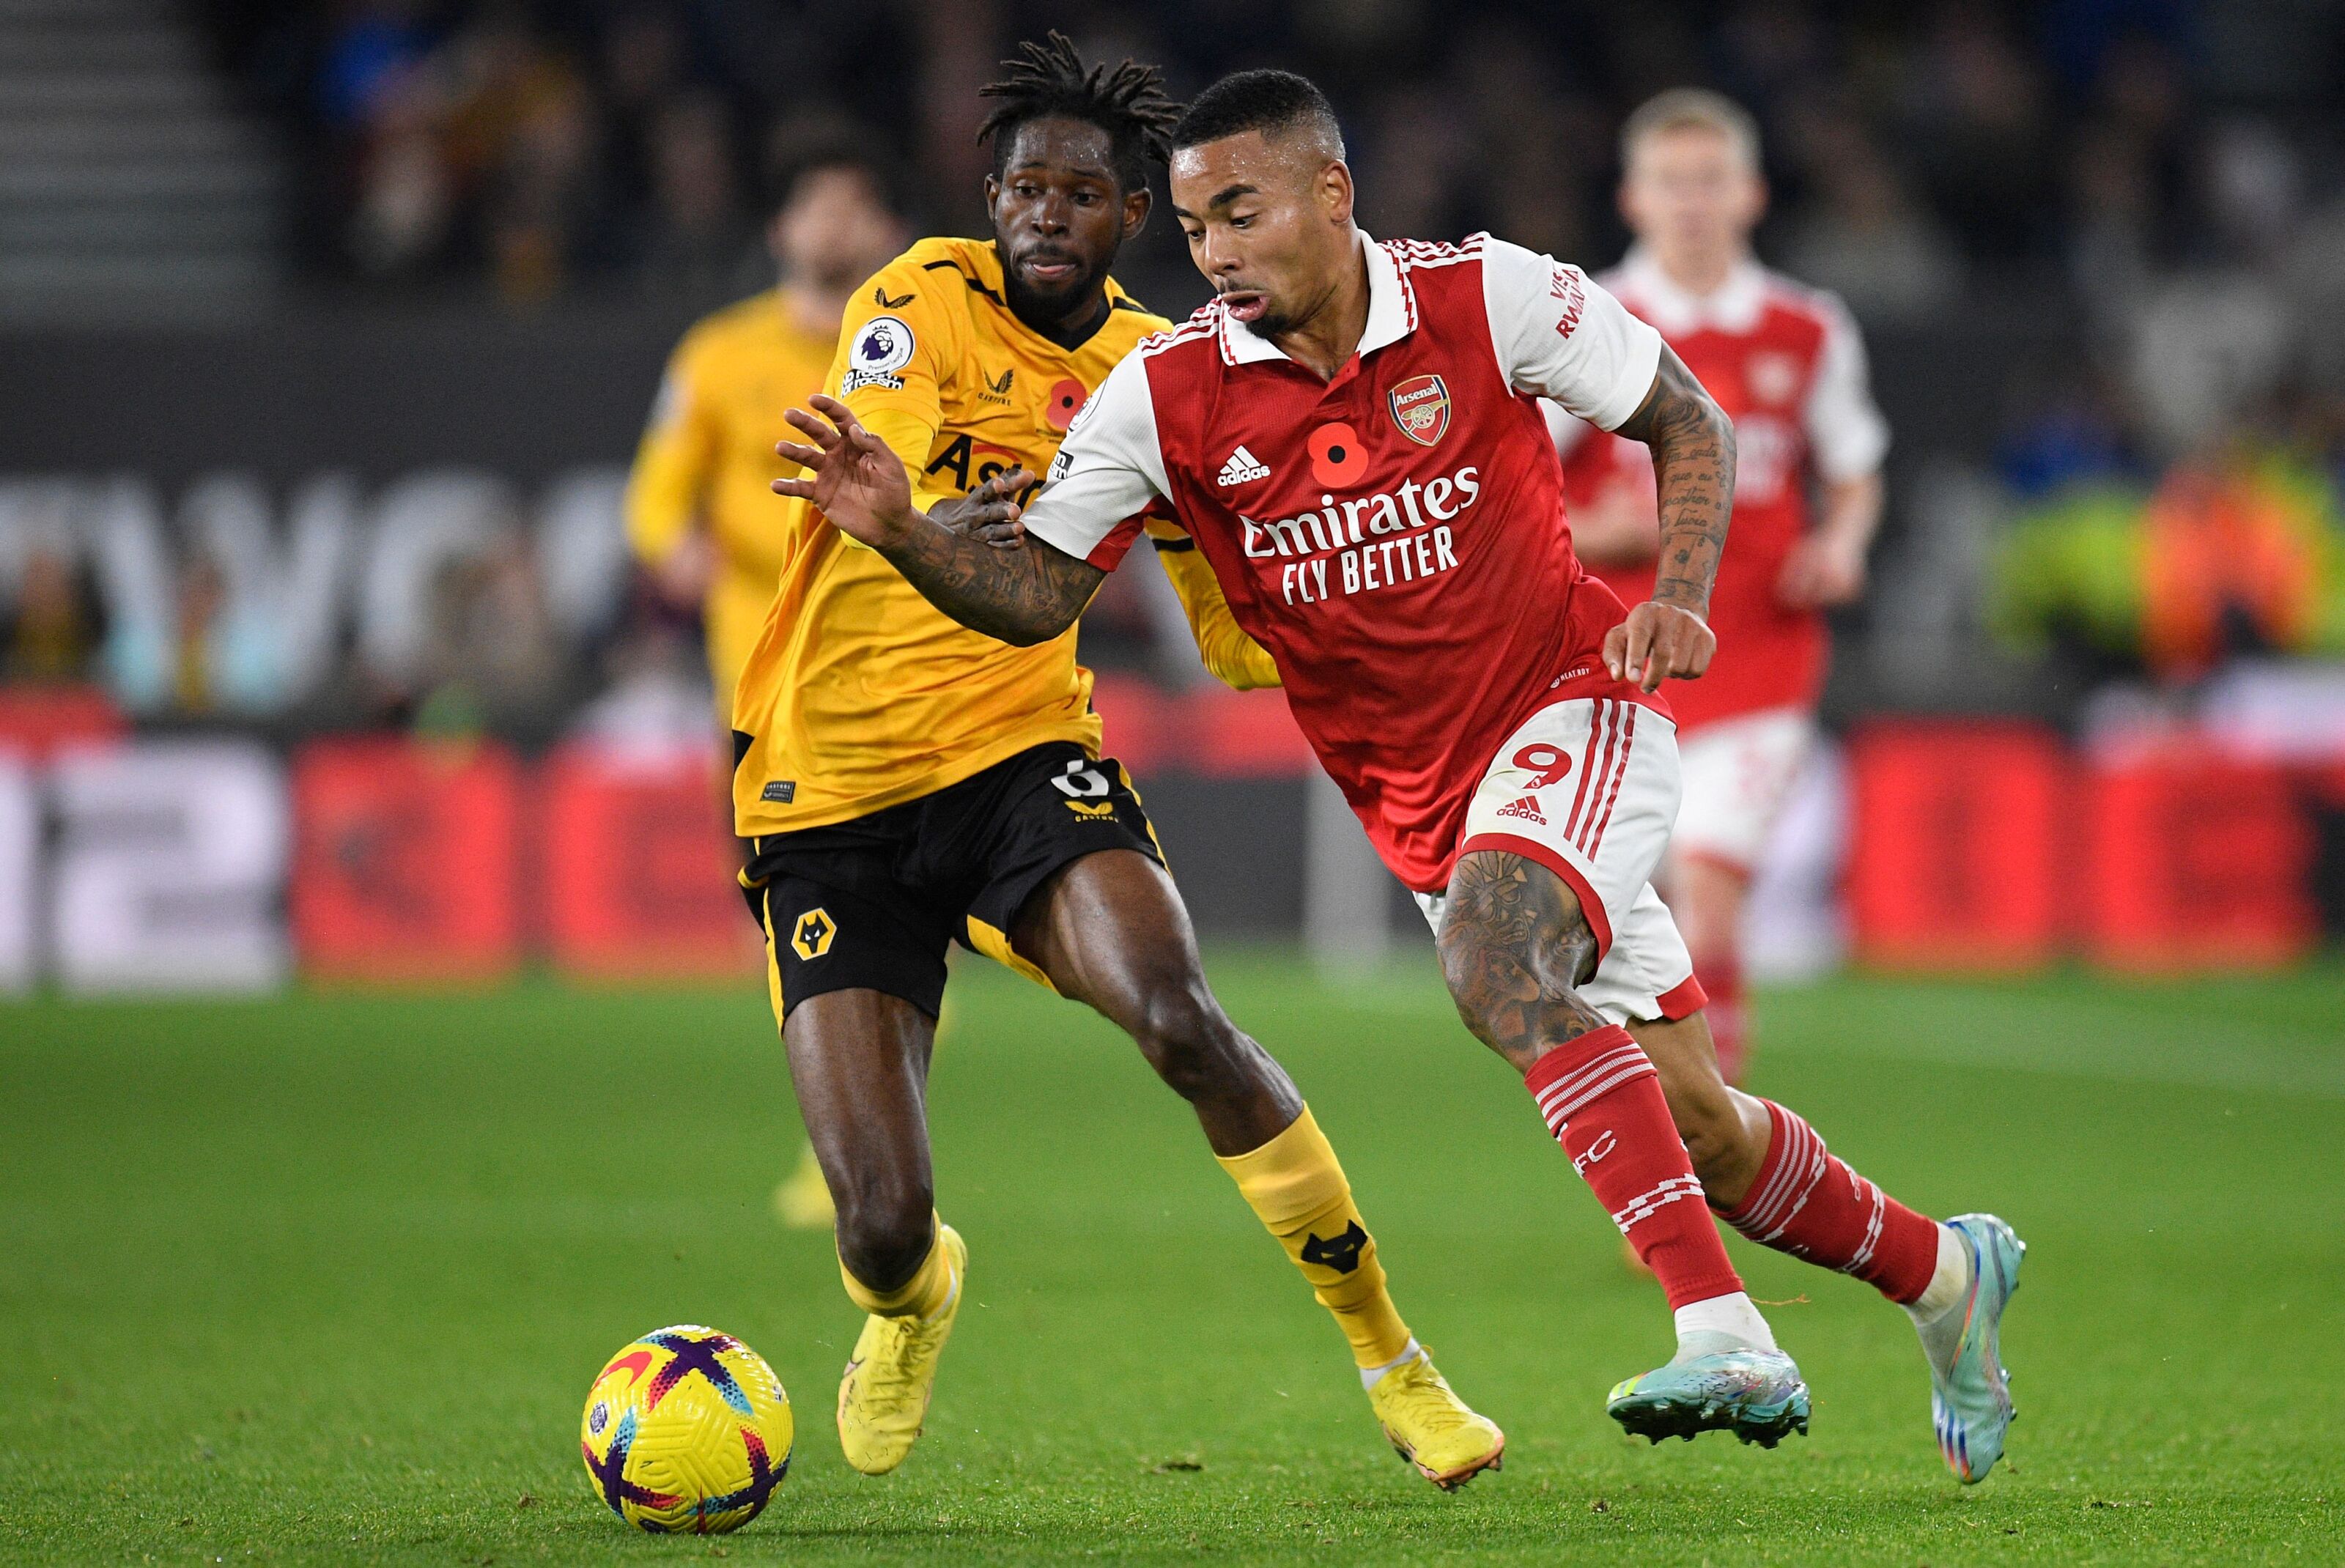 Arsenal vs Wolves Preview: Prediction, Team News & Lineups